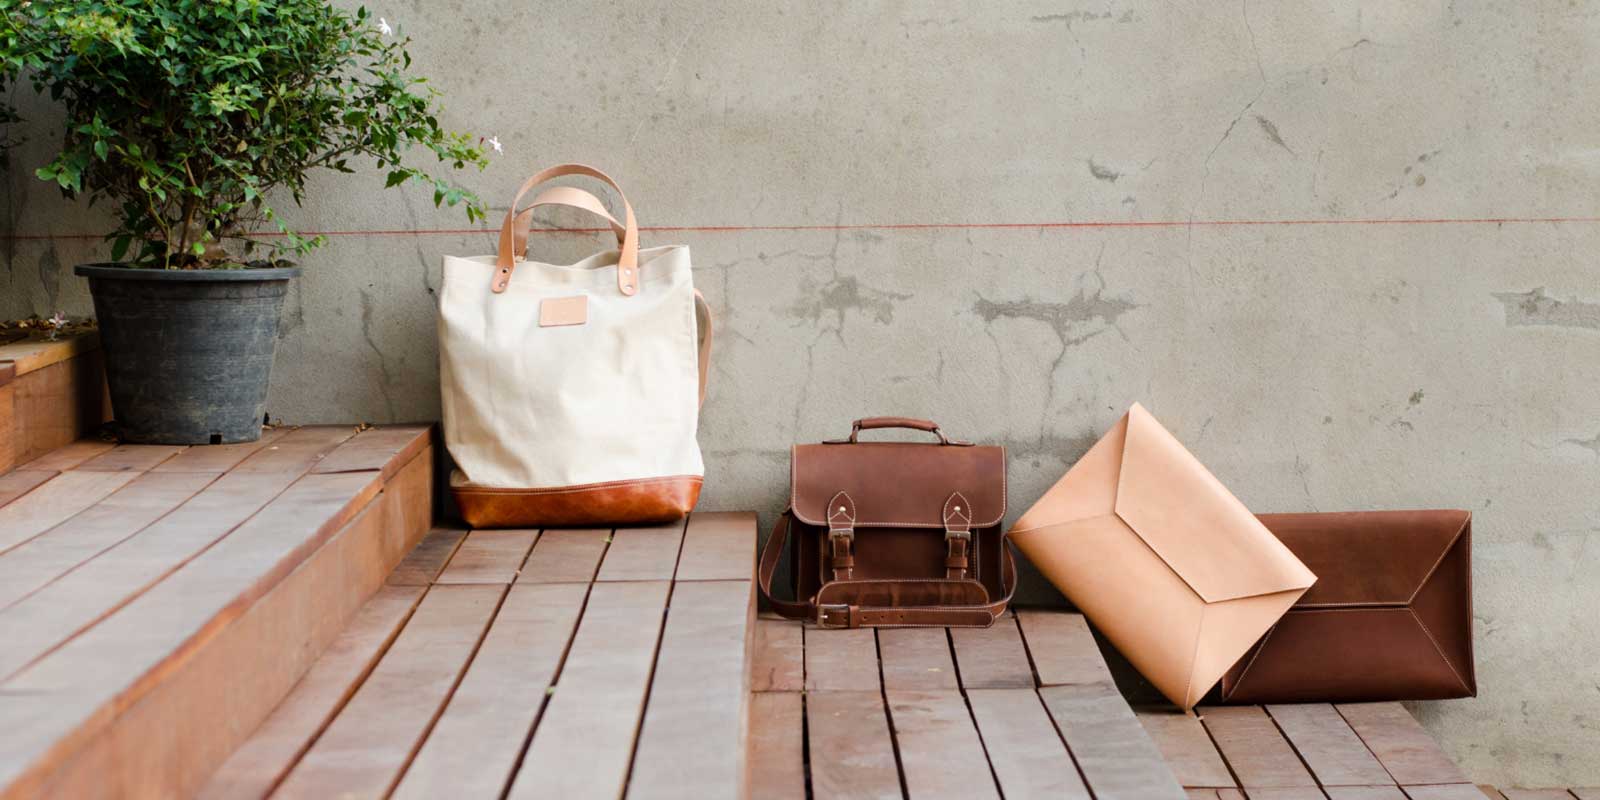 What Is The Difference Between Tote, Satchel, and Handbag?